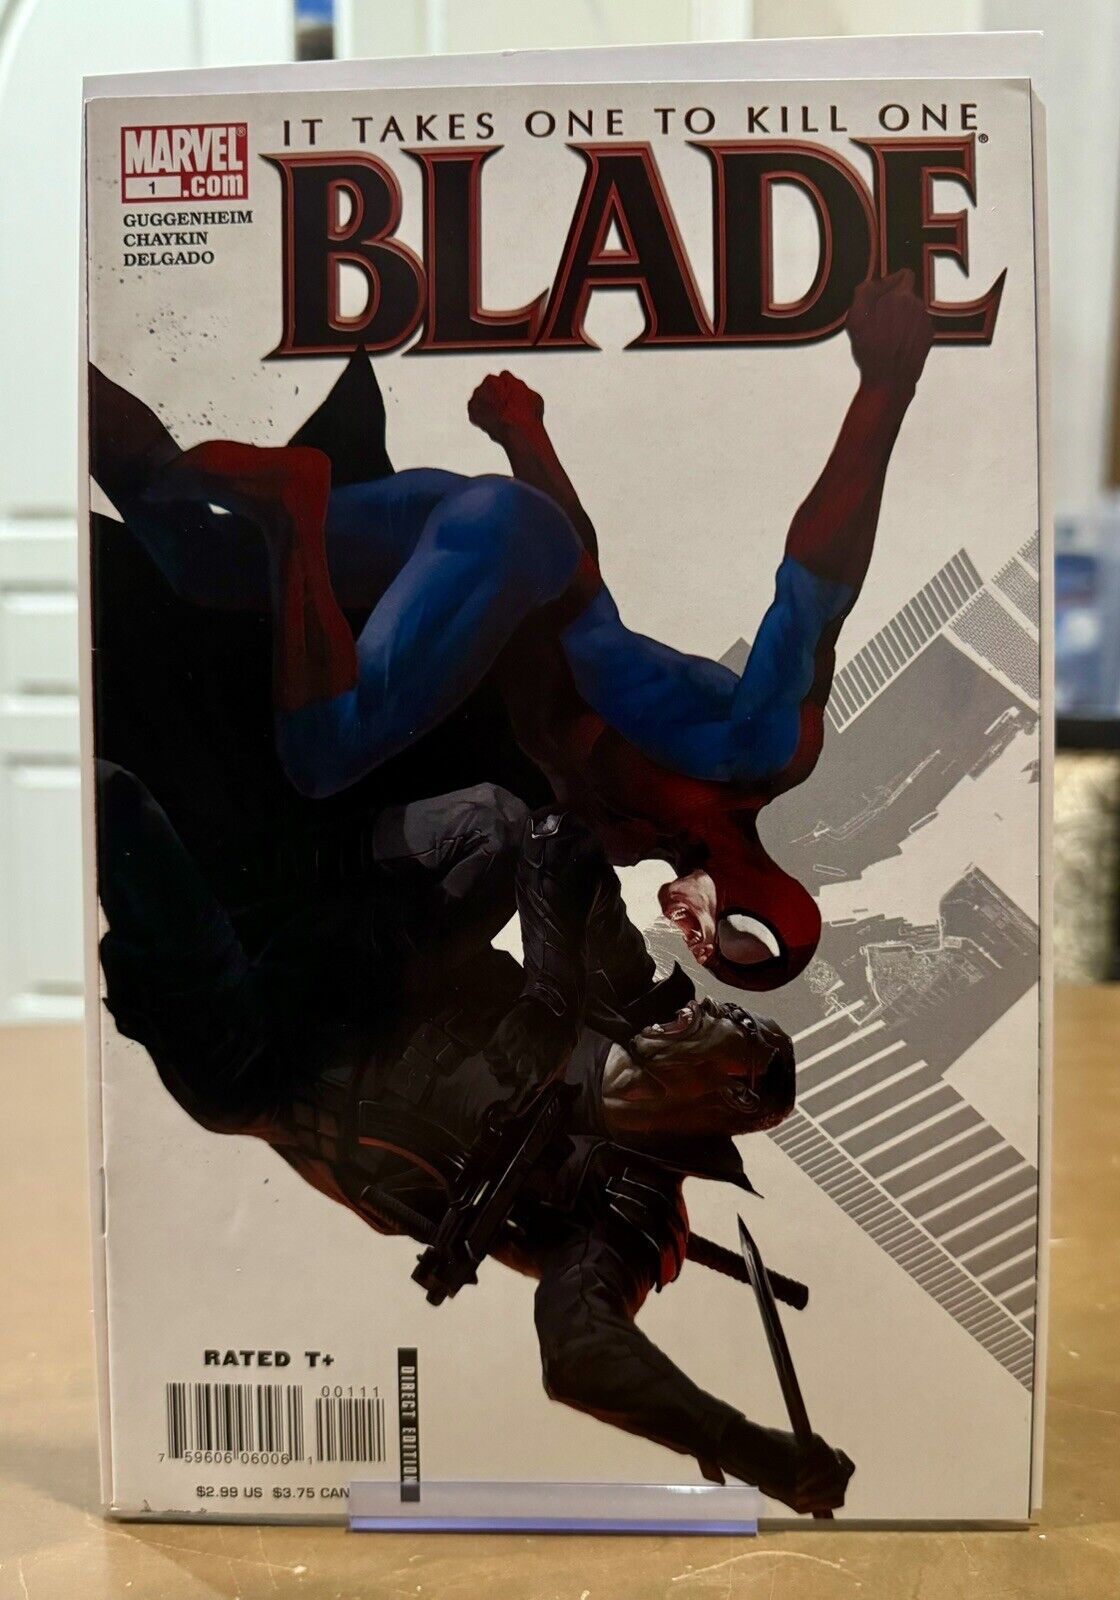 Blade #1 It Takes One To Kill One Spider-Man (Marvel Comics 2006) VF/NM